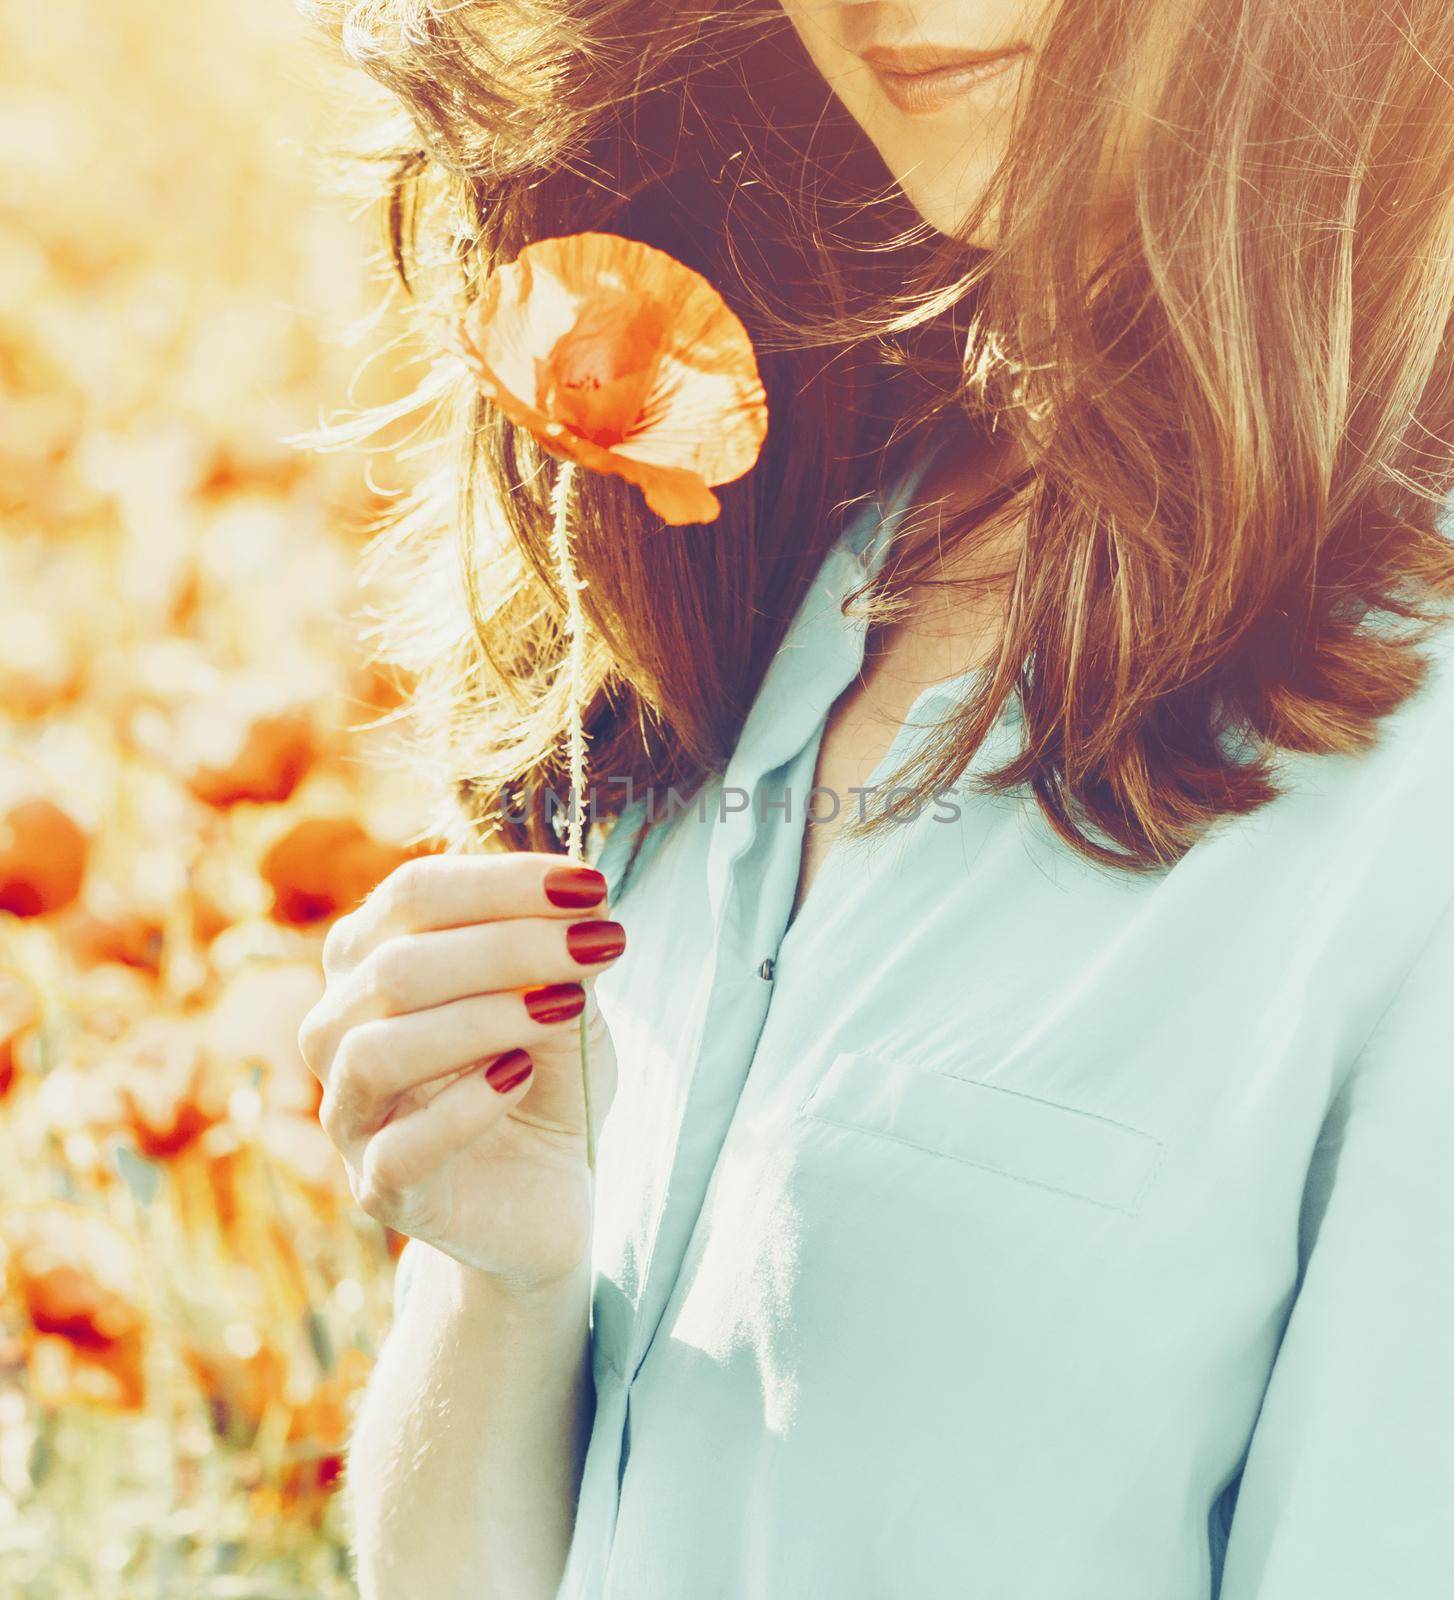 Smiling woman holding poppy flower in spring outdoor. by alexAleksei